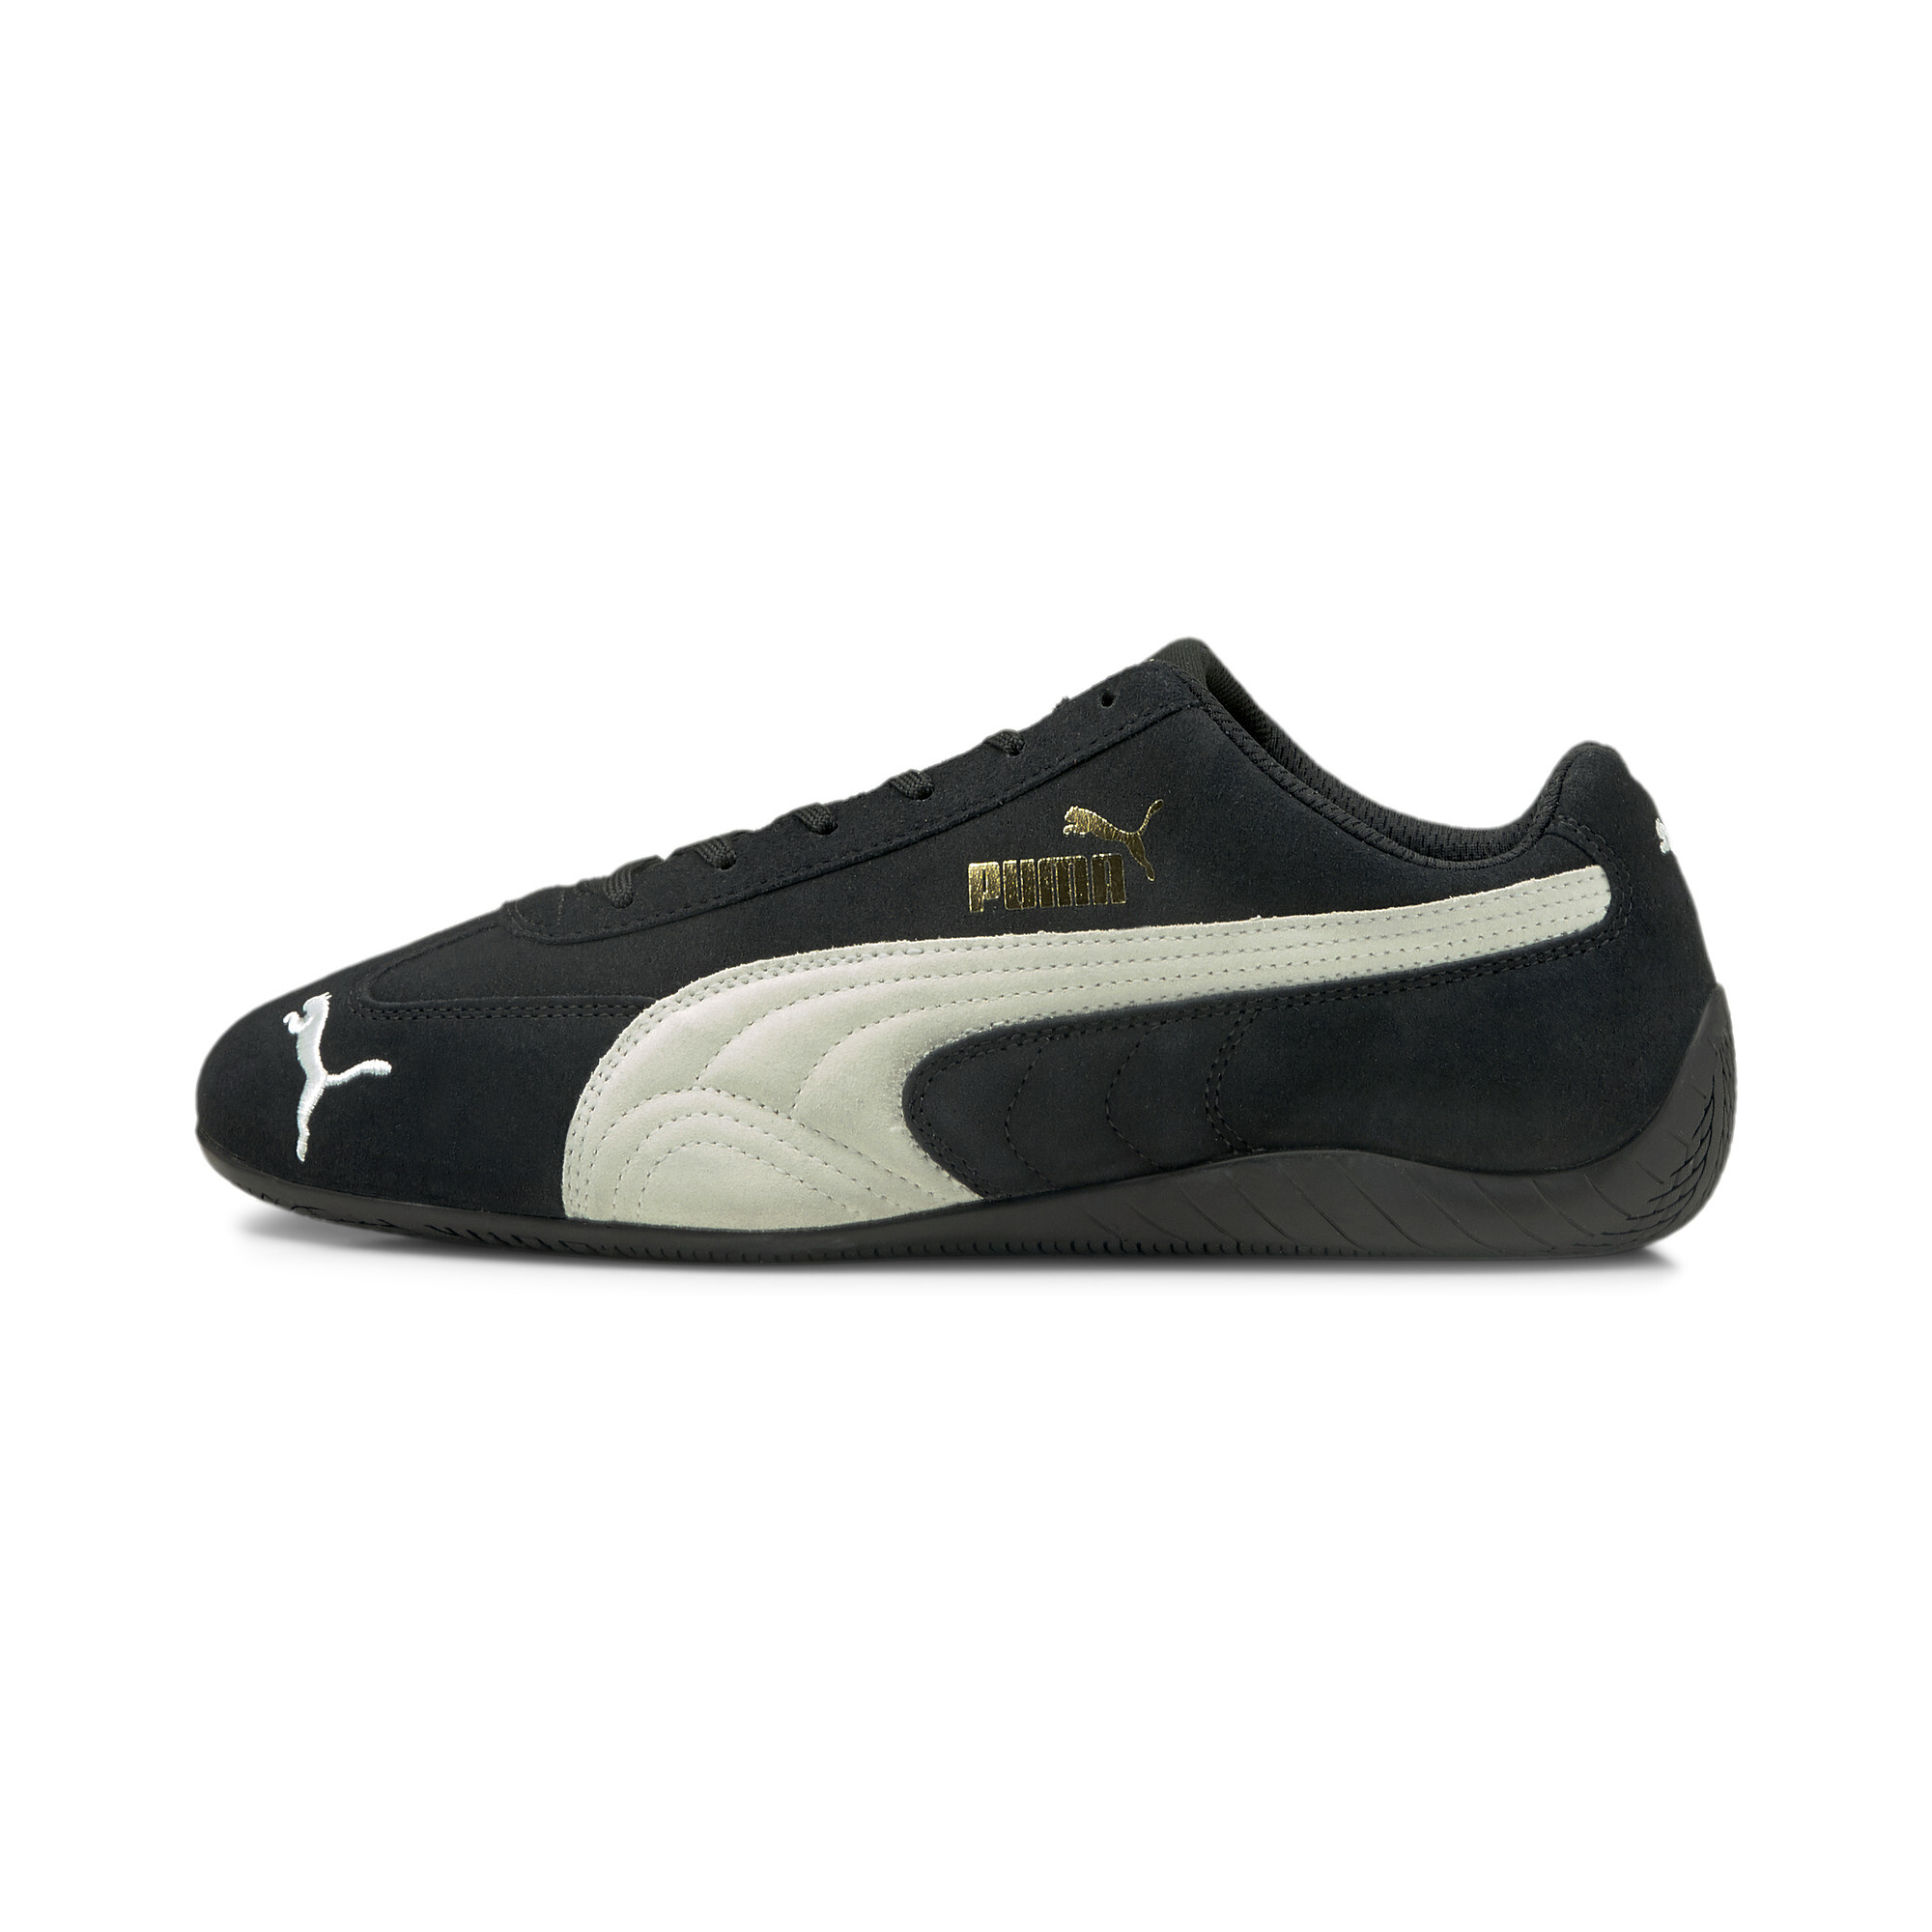 PUMA SpeedCat LS Low Top Lace Up Suede Driving Shoes Trainers - Unisex ...